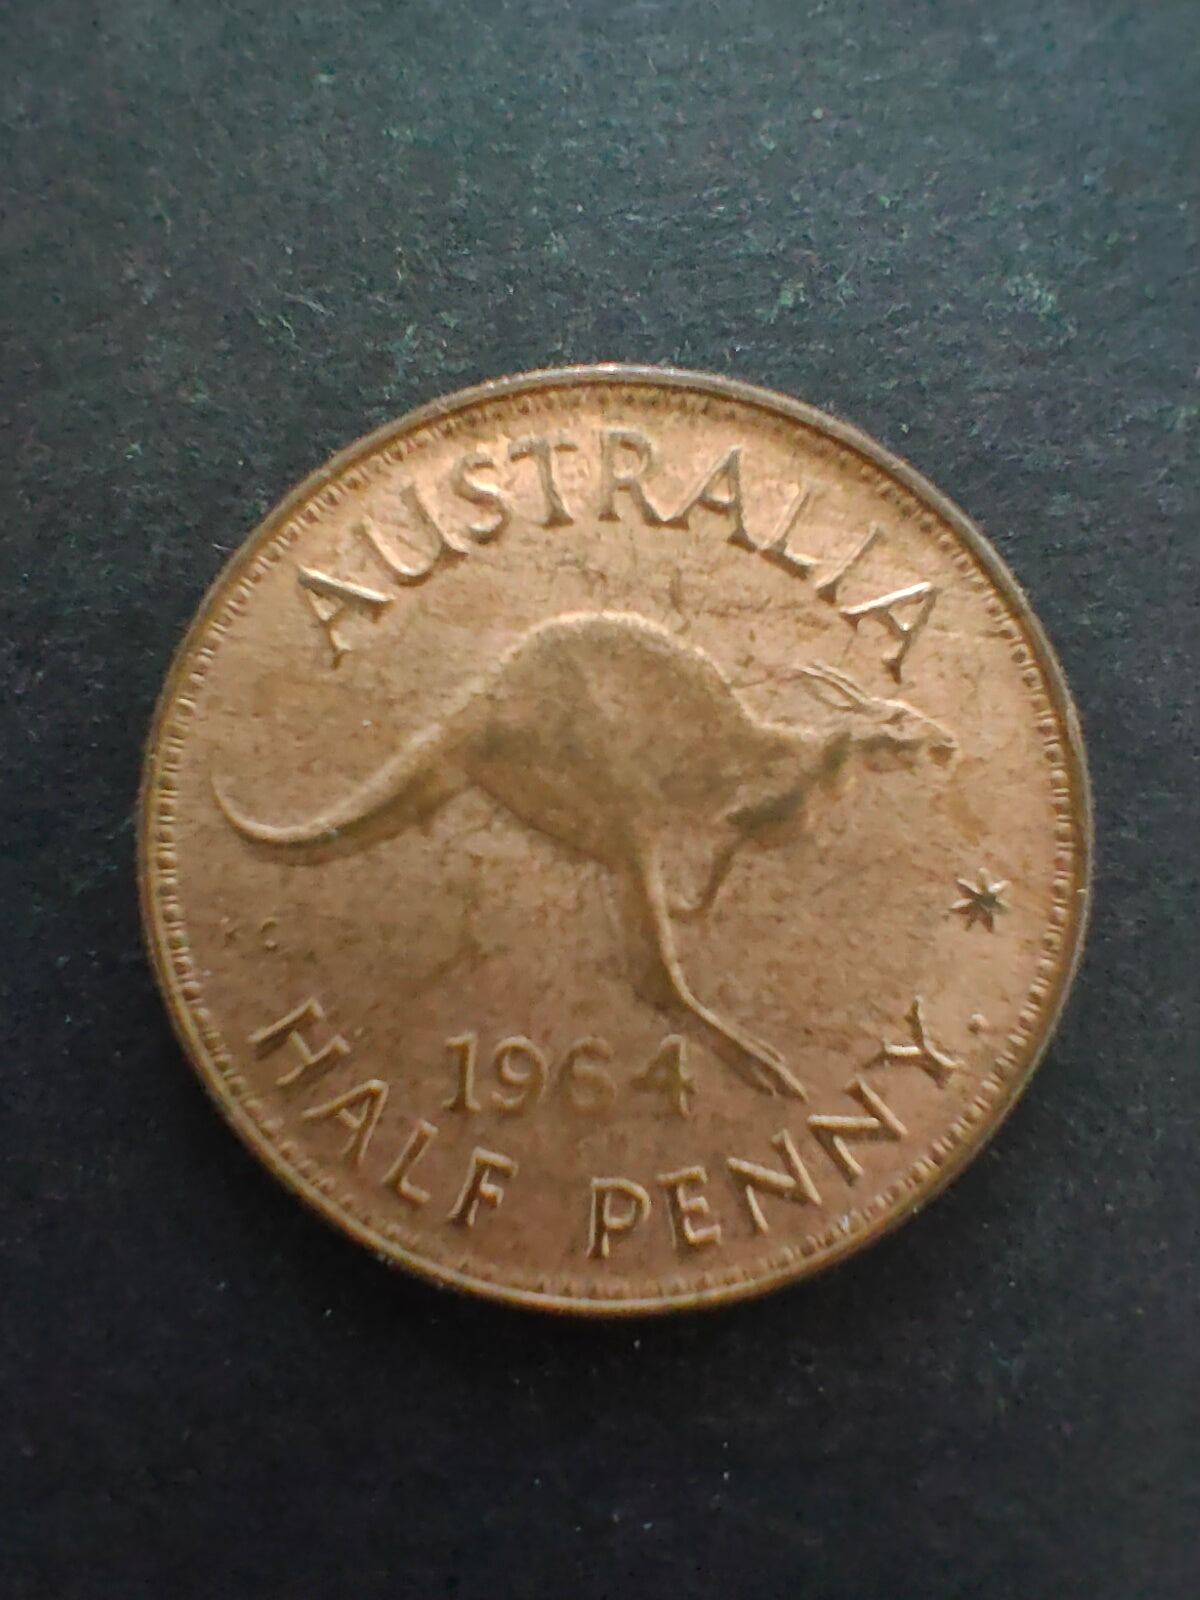 Australia 1964 1/2d Half Penny Extremely Fine Condition